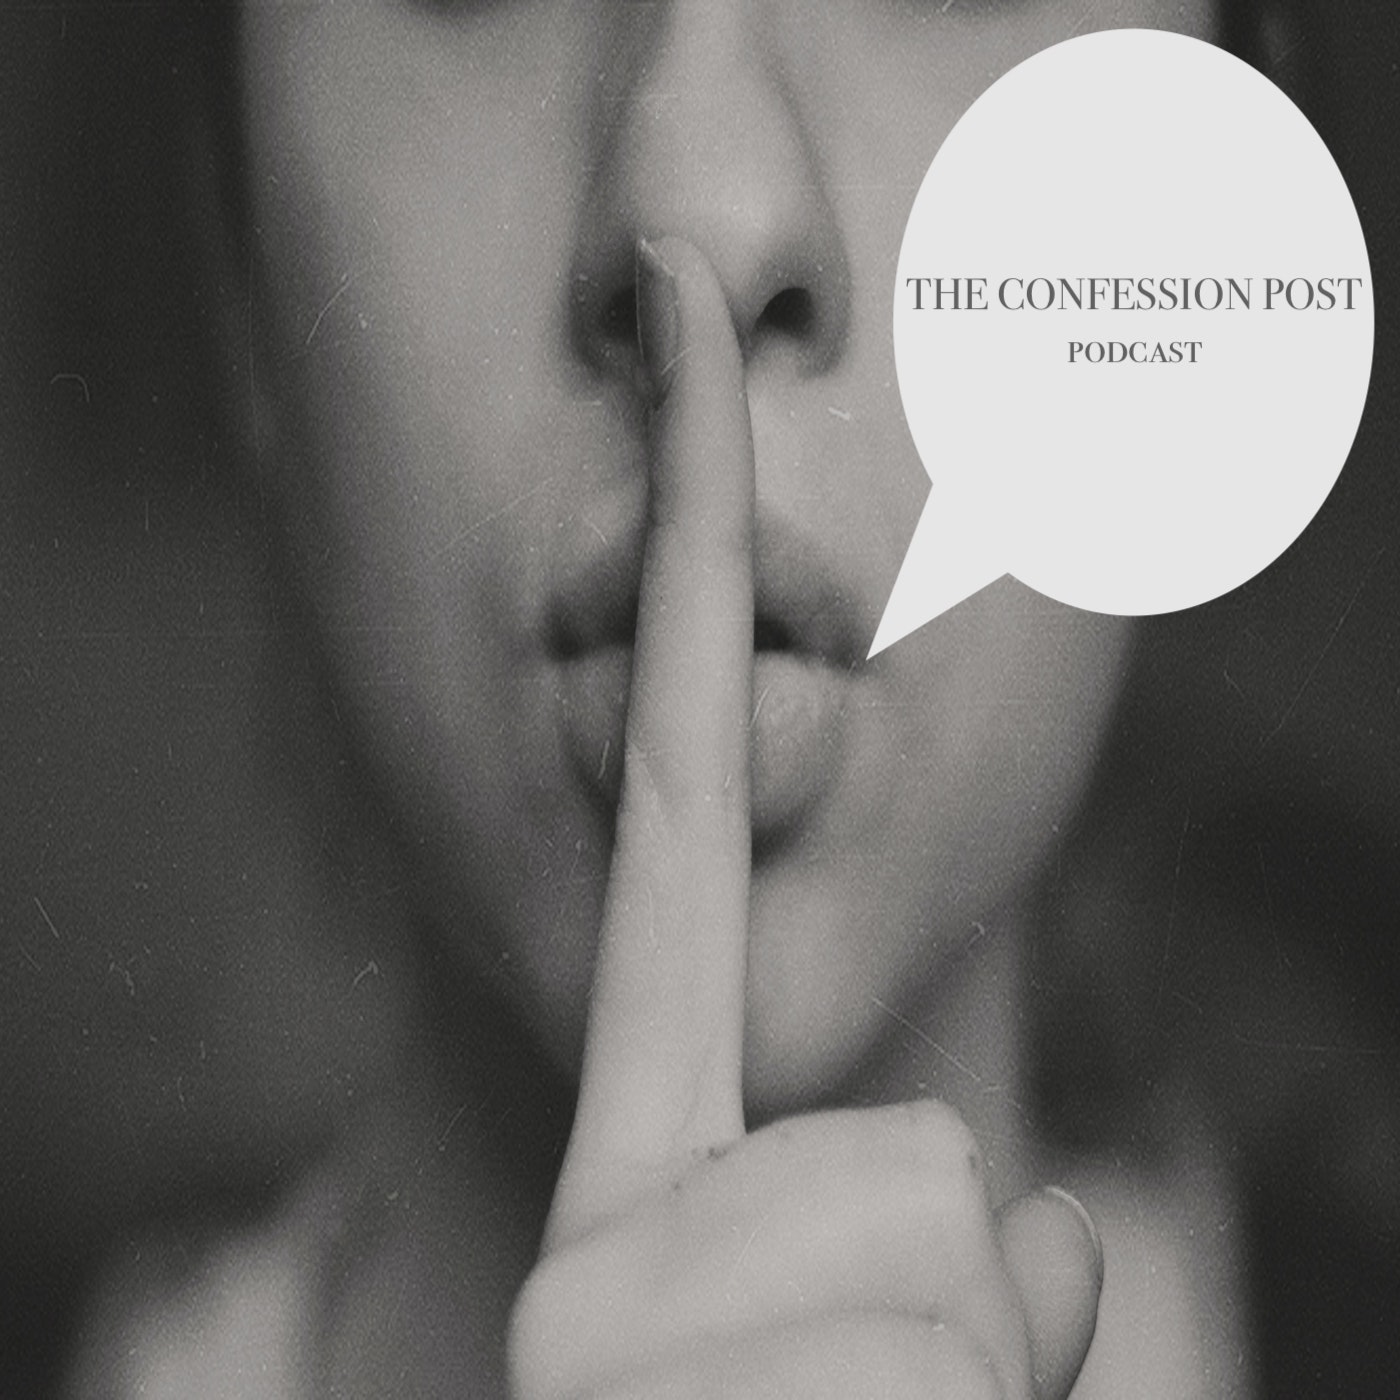 The Confession Post Podcast